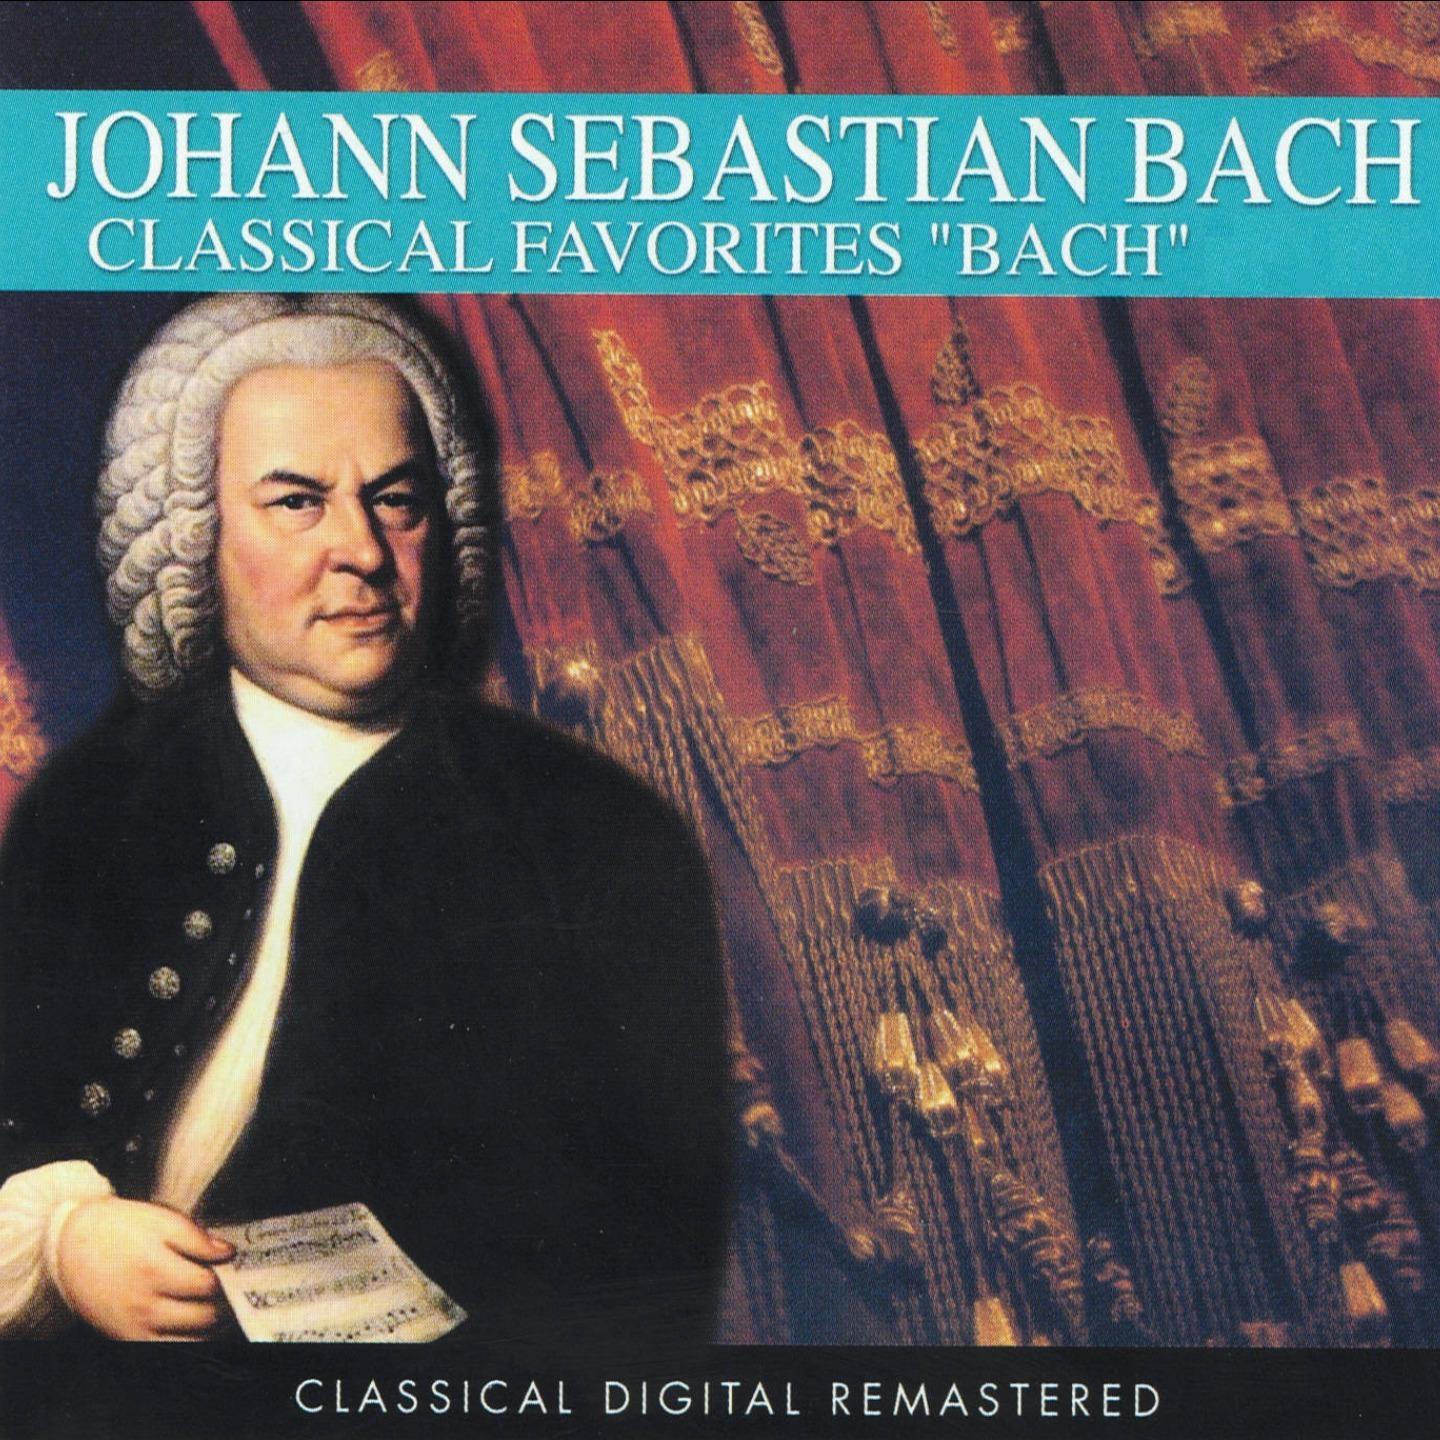 Suite for Orchestra No. 2, in B Minor, BWV 1067: Sarabande